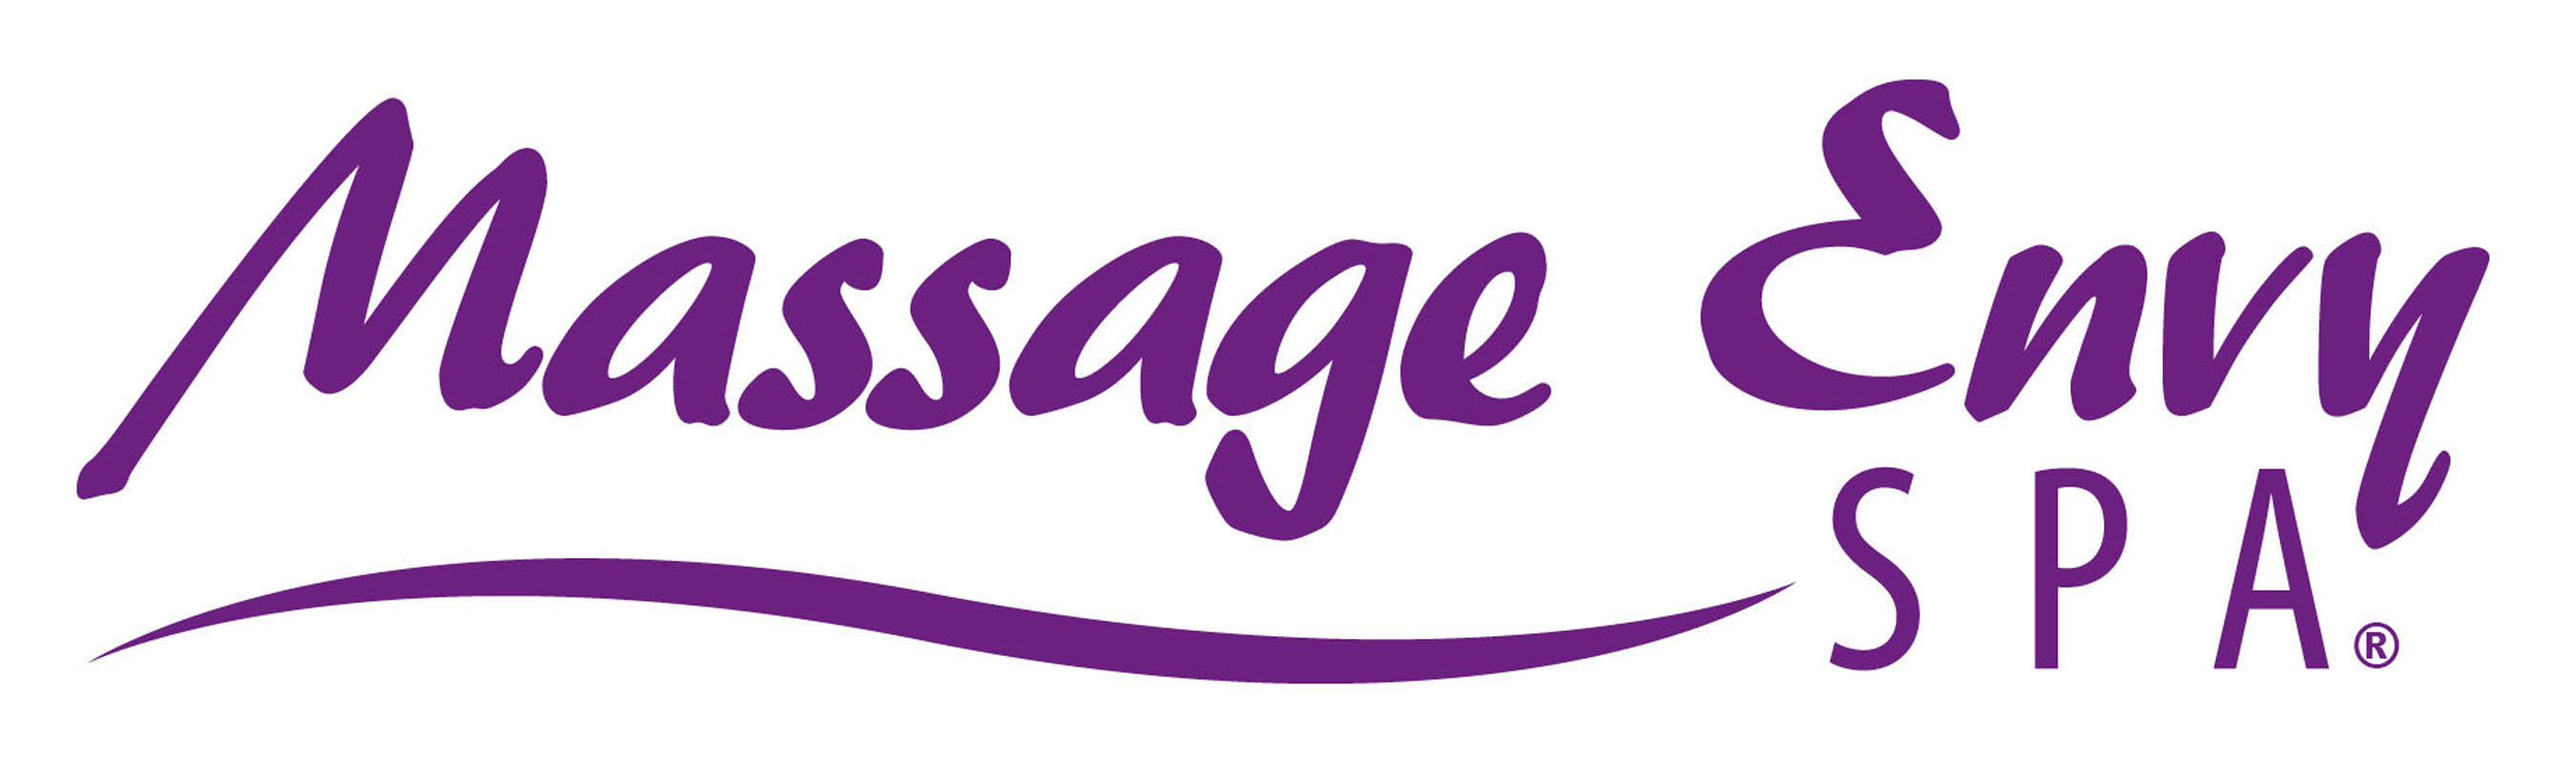 There’s a Fresh Face in the North Suburbs: Massage Envy Spa Now Open in Niles/Skokie 1 The nations’ pioneer and largest massage therapy provider, Massage Envy is pleased to announce Massage Envy Spa Niles/Skokie will host its Grand Opening event on Tuesday, August 5 from 5 p.m. to 6:30 p.m.at Village Crossing Shopping Center, 5661 W. Touhy Ave., Unit A, in Niles. Village of Niles Mayor Andrew Przybylo and Niles Chamber of Commerce Executive Director Katie Schneider will officially cut the ribbon at 5 p.m. Neighborhood guests and local press will be able to mingle and enjoy complementary chair massages performed by one of Massage Envy Spa Niles/Skokie’s professional massage therapists, or enjoy a free skin analysis done by one of the clinic’s estheticians. The spa is centrally located to serve the communities of Niles, Skokie, Lincolnwood, Morton Grove, Park Ridge, and the Chicago neighborhoods of Edgebrook, Wildwood, Sauganash, Norwood Park, Jefferson Park and Edison Park. The relaxing 3,600+ square-foot clinic has nine therapy rooms and four dual-purpose rooms.